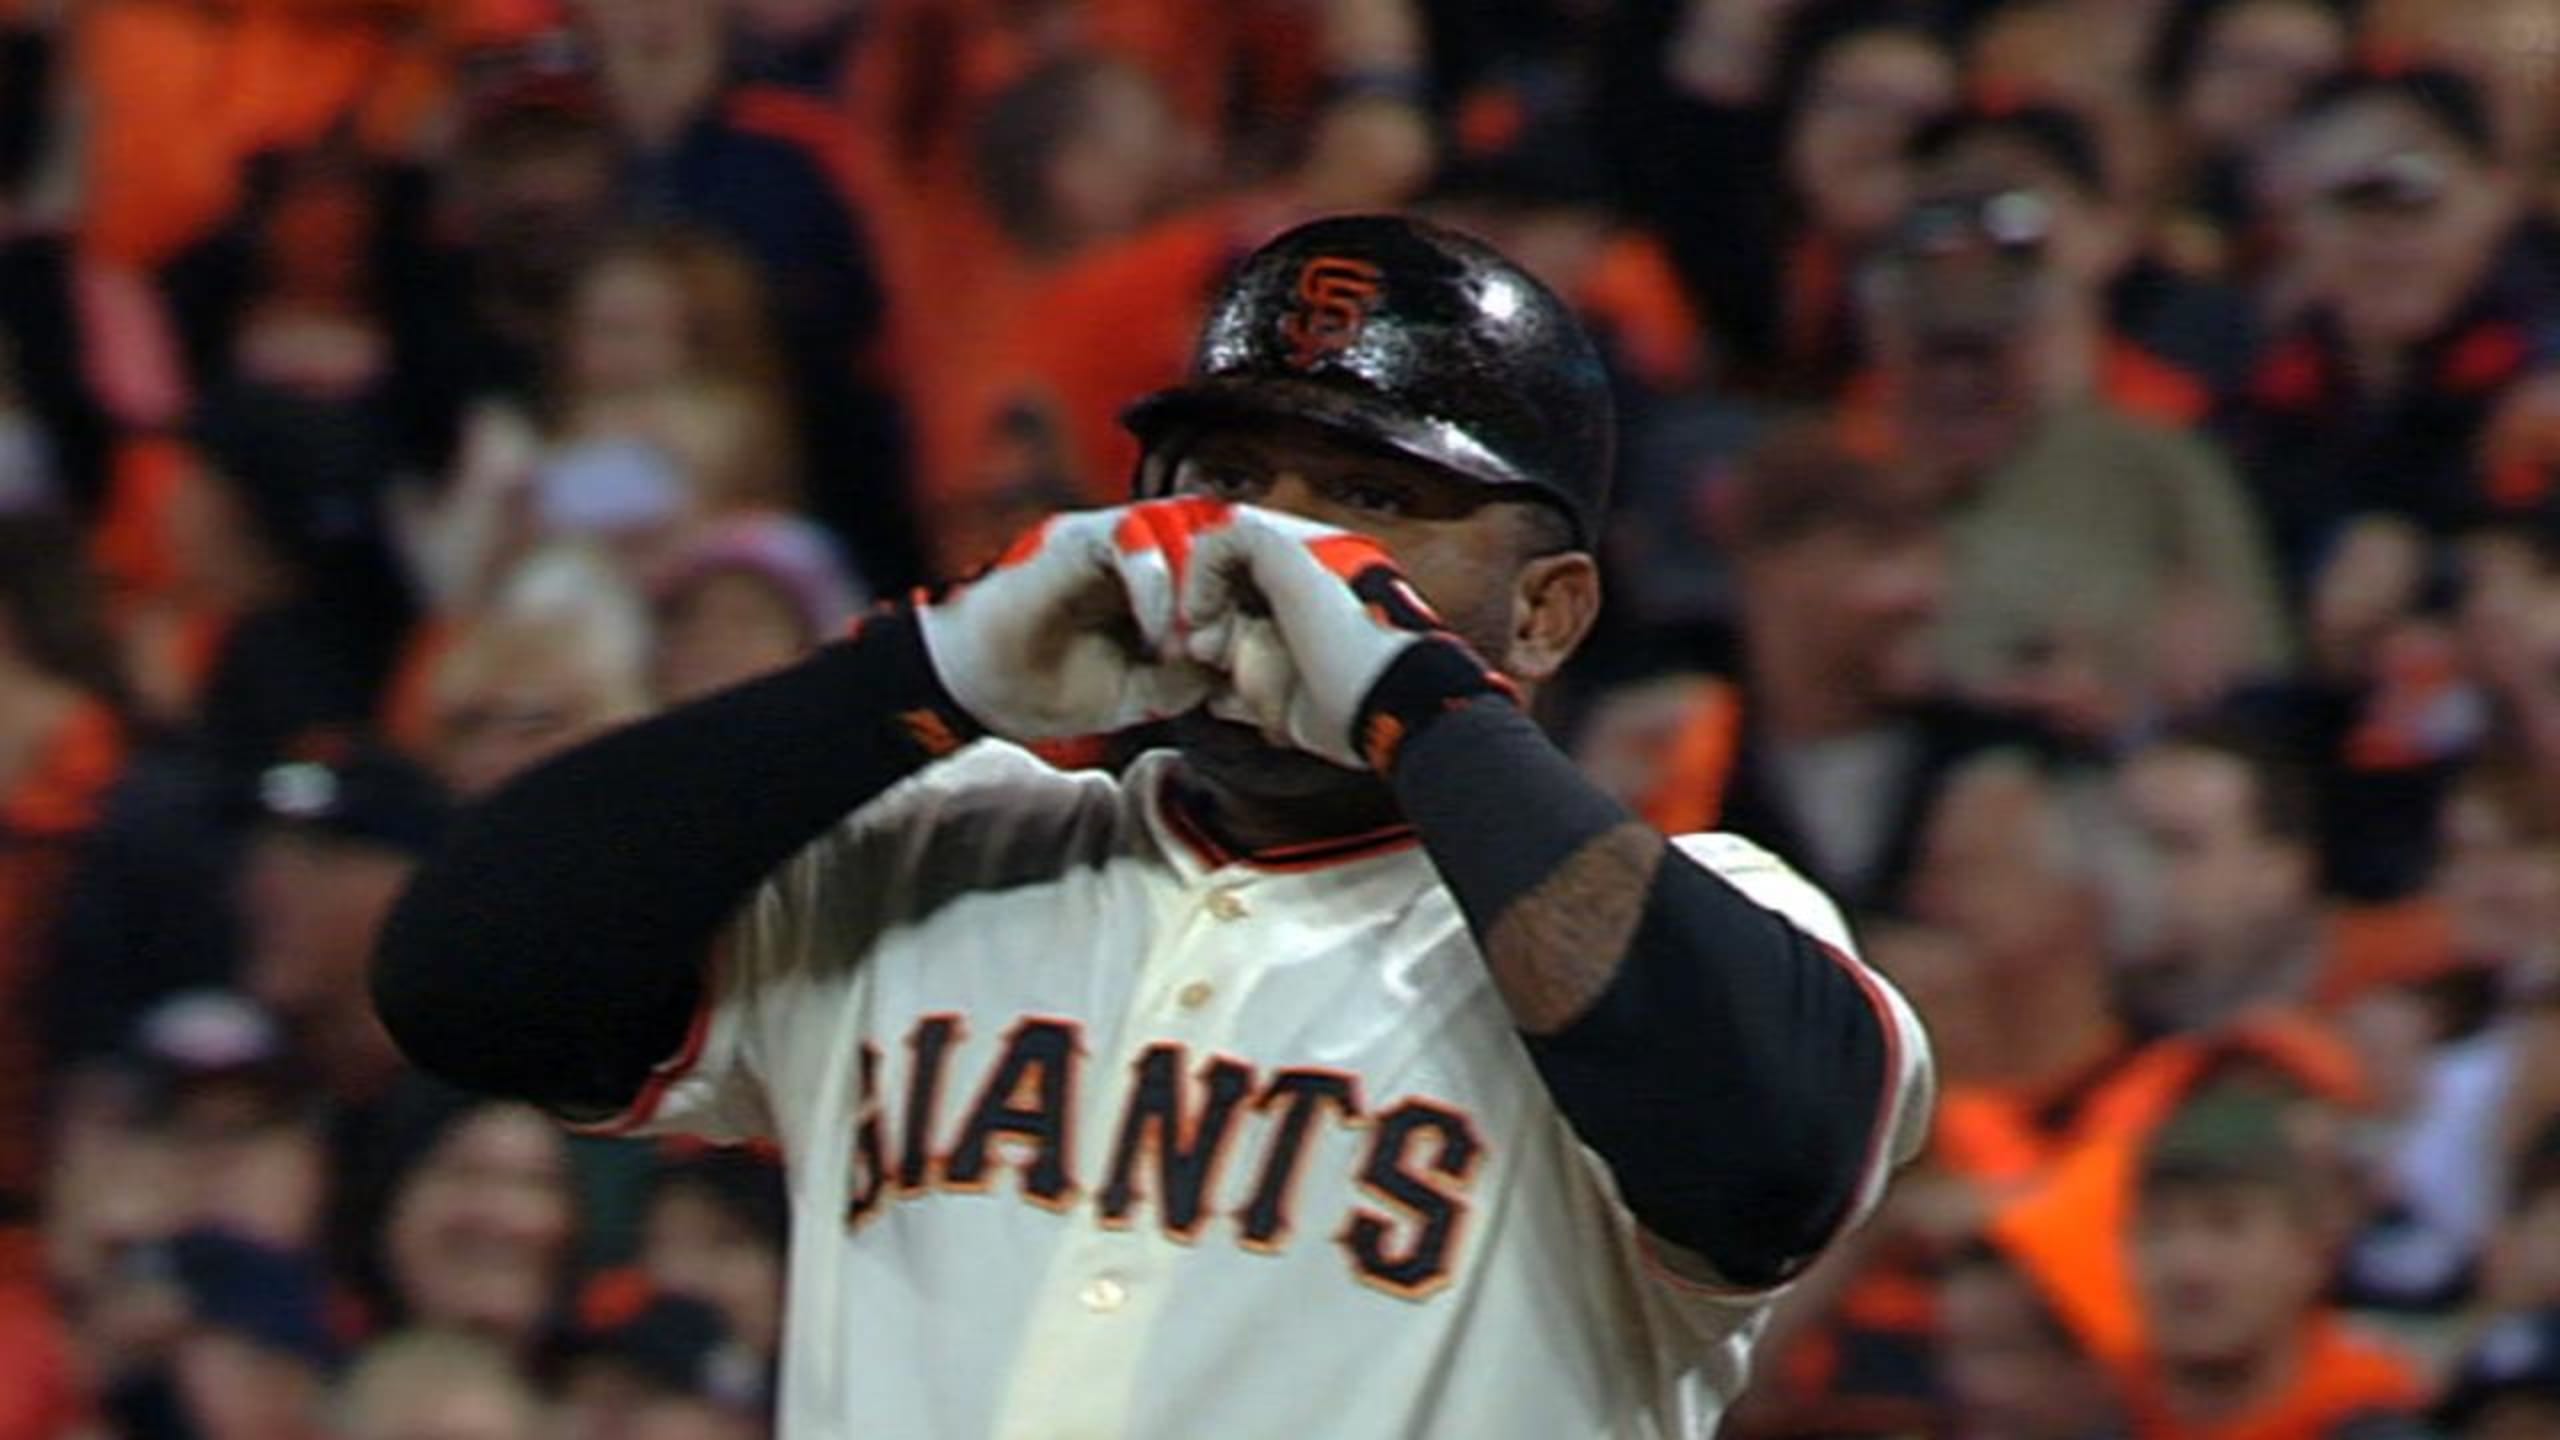 Red Sox Bench Former Giants Star Pablo Sandoval For Using Instagram During  Game - CBS San Francisco